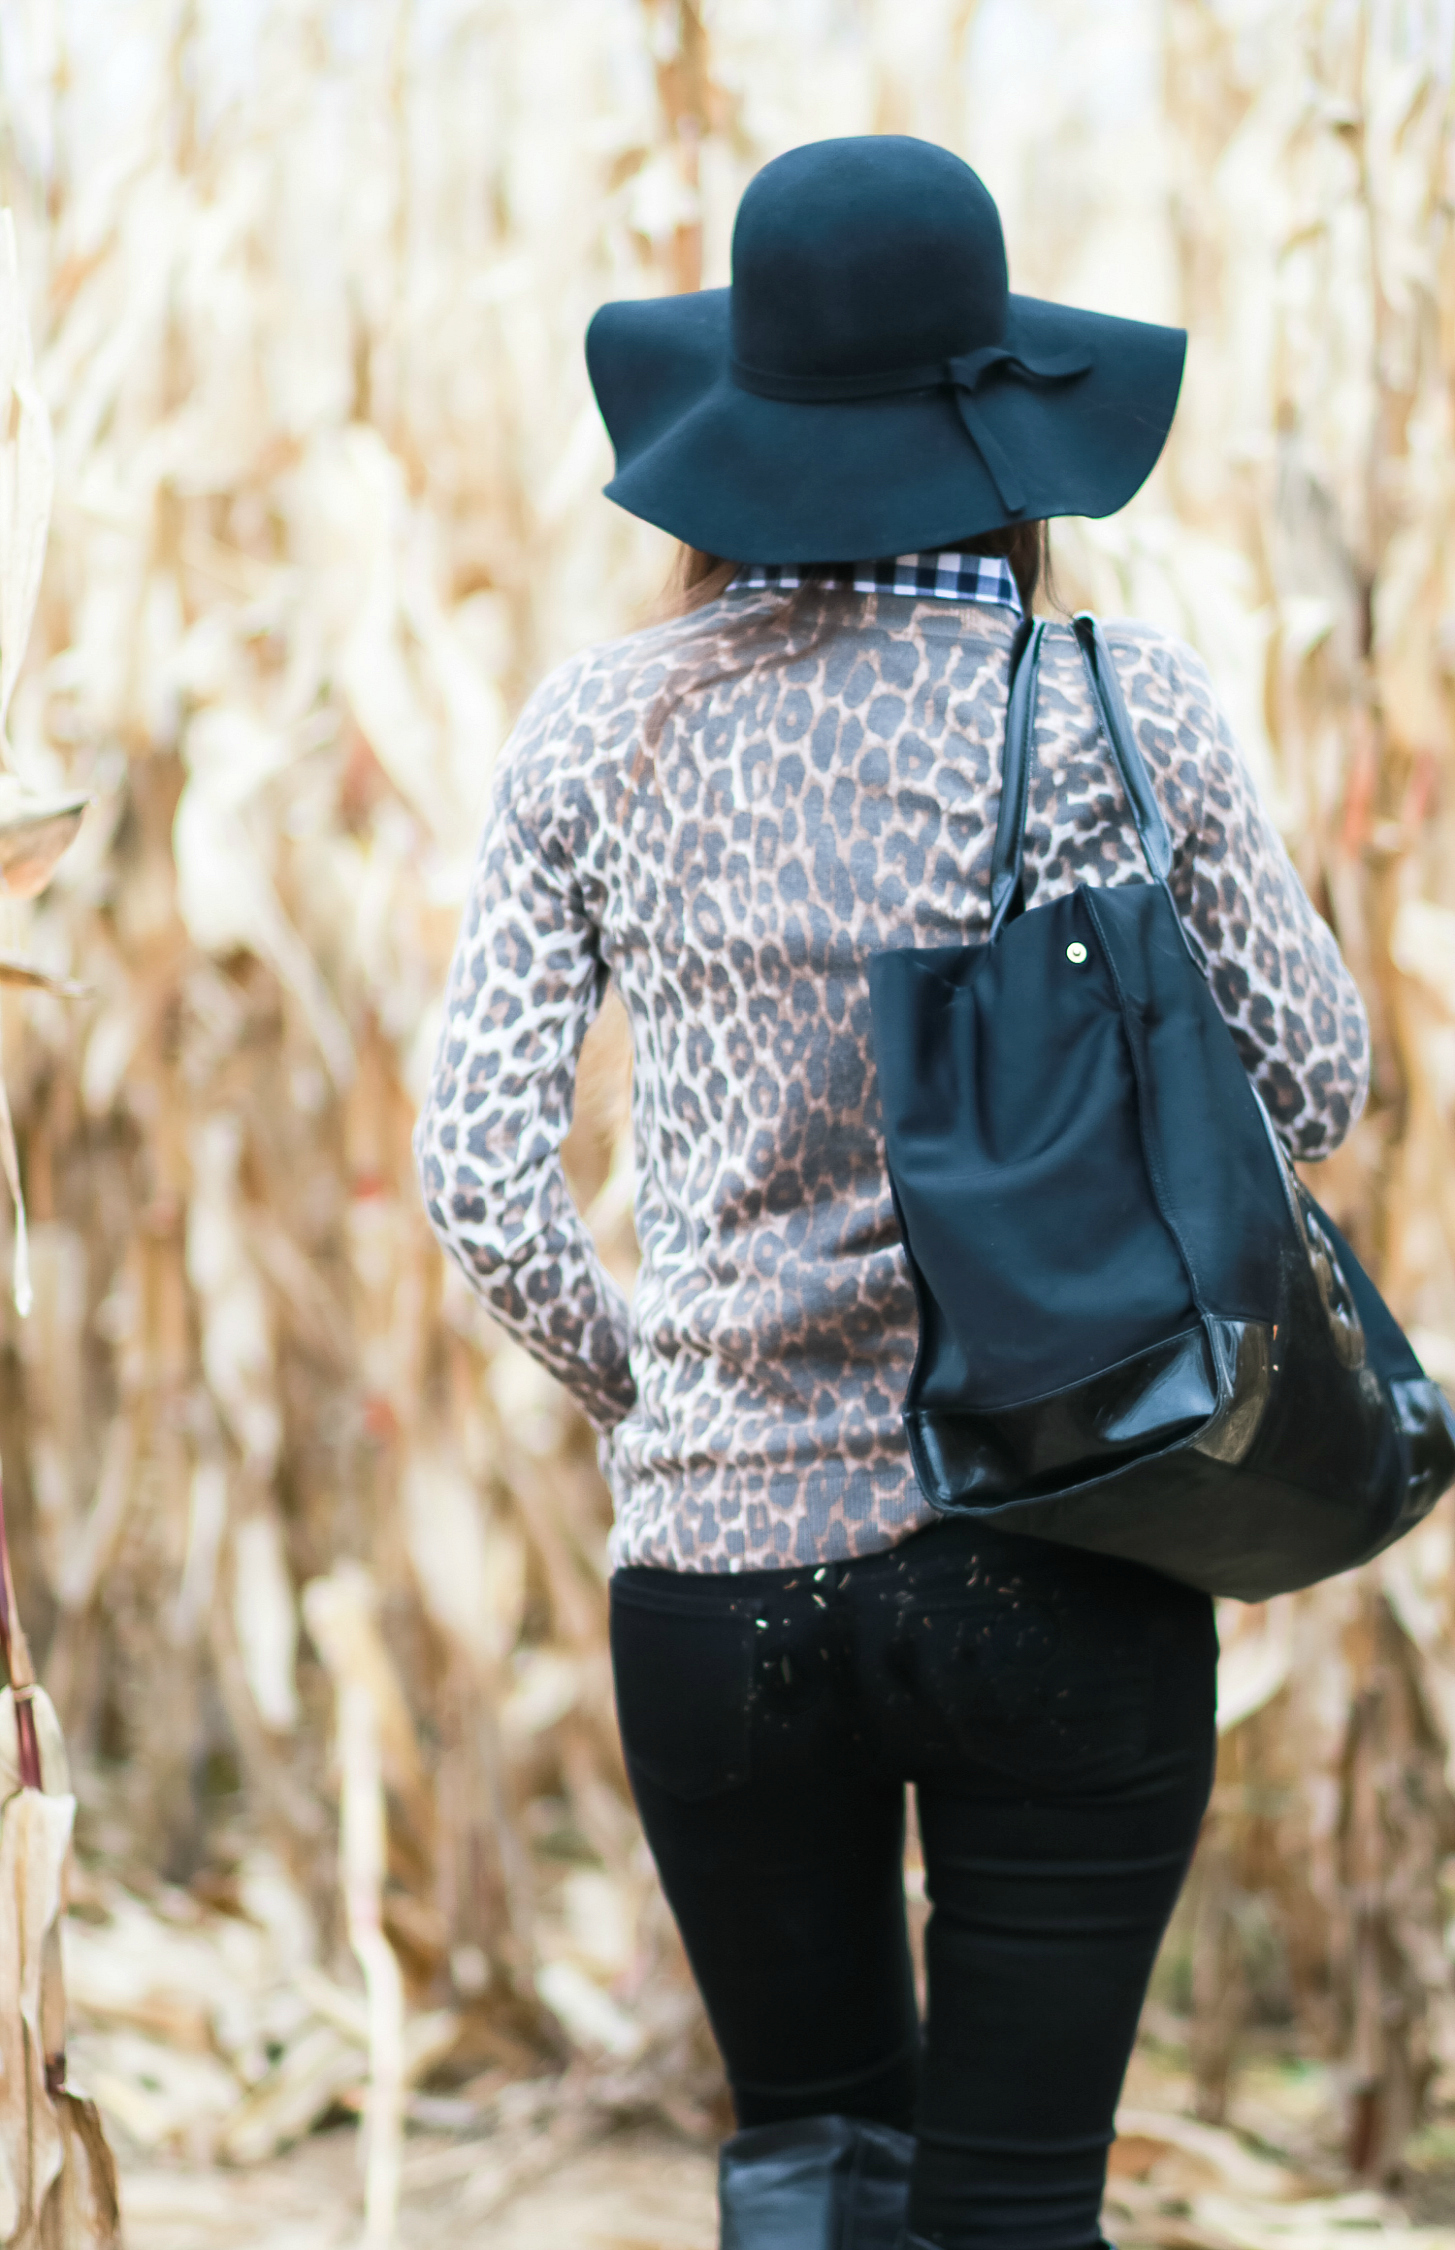 Black floppy hat with leopard crewneck sweater, J.Crew Factory blue gingham button down, black jeans, Nine West tall black boots, and a Tory Burch Ella tote | Comfy and casual fall outfit idea | Floppy hat outfit idea | How to wear a floppy hat in the fall by fashion blogger Stephanie Ziajka from Diary of a Debutante